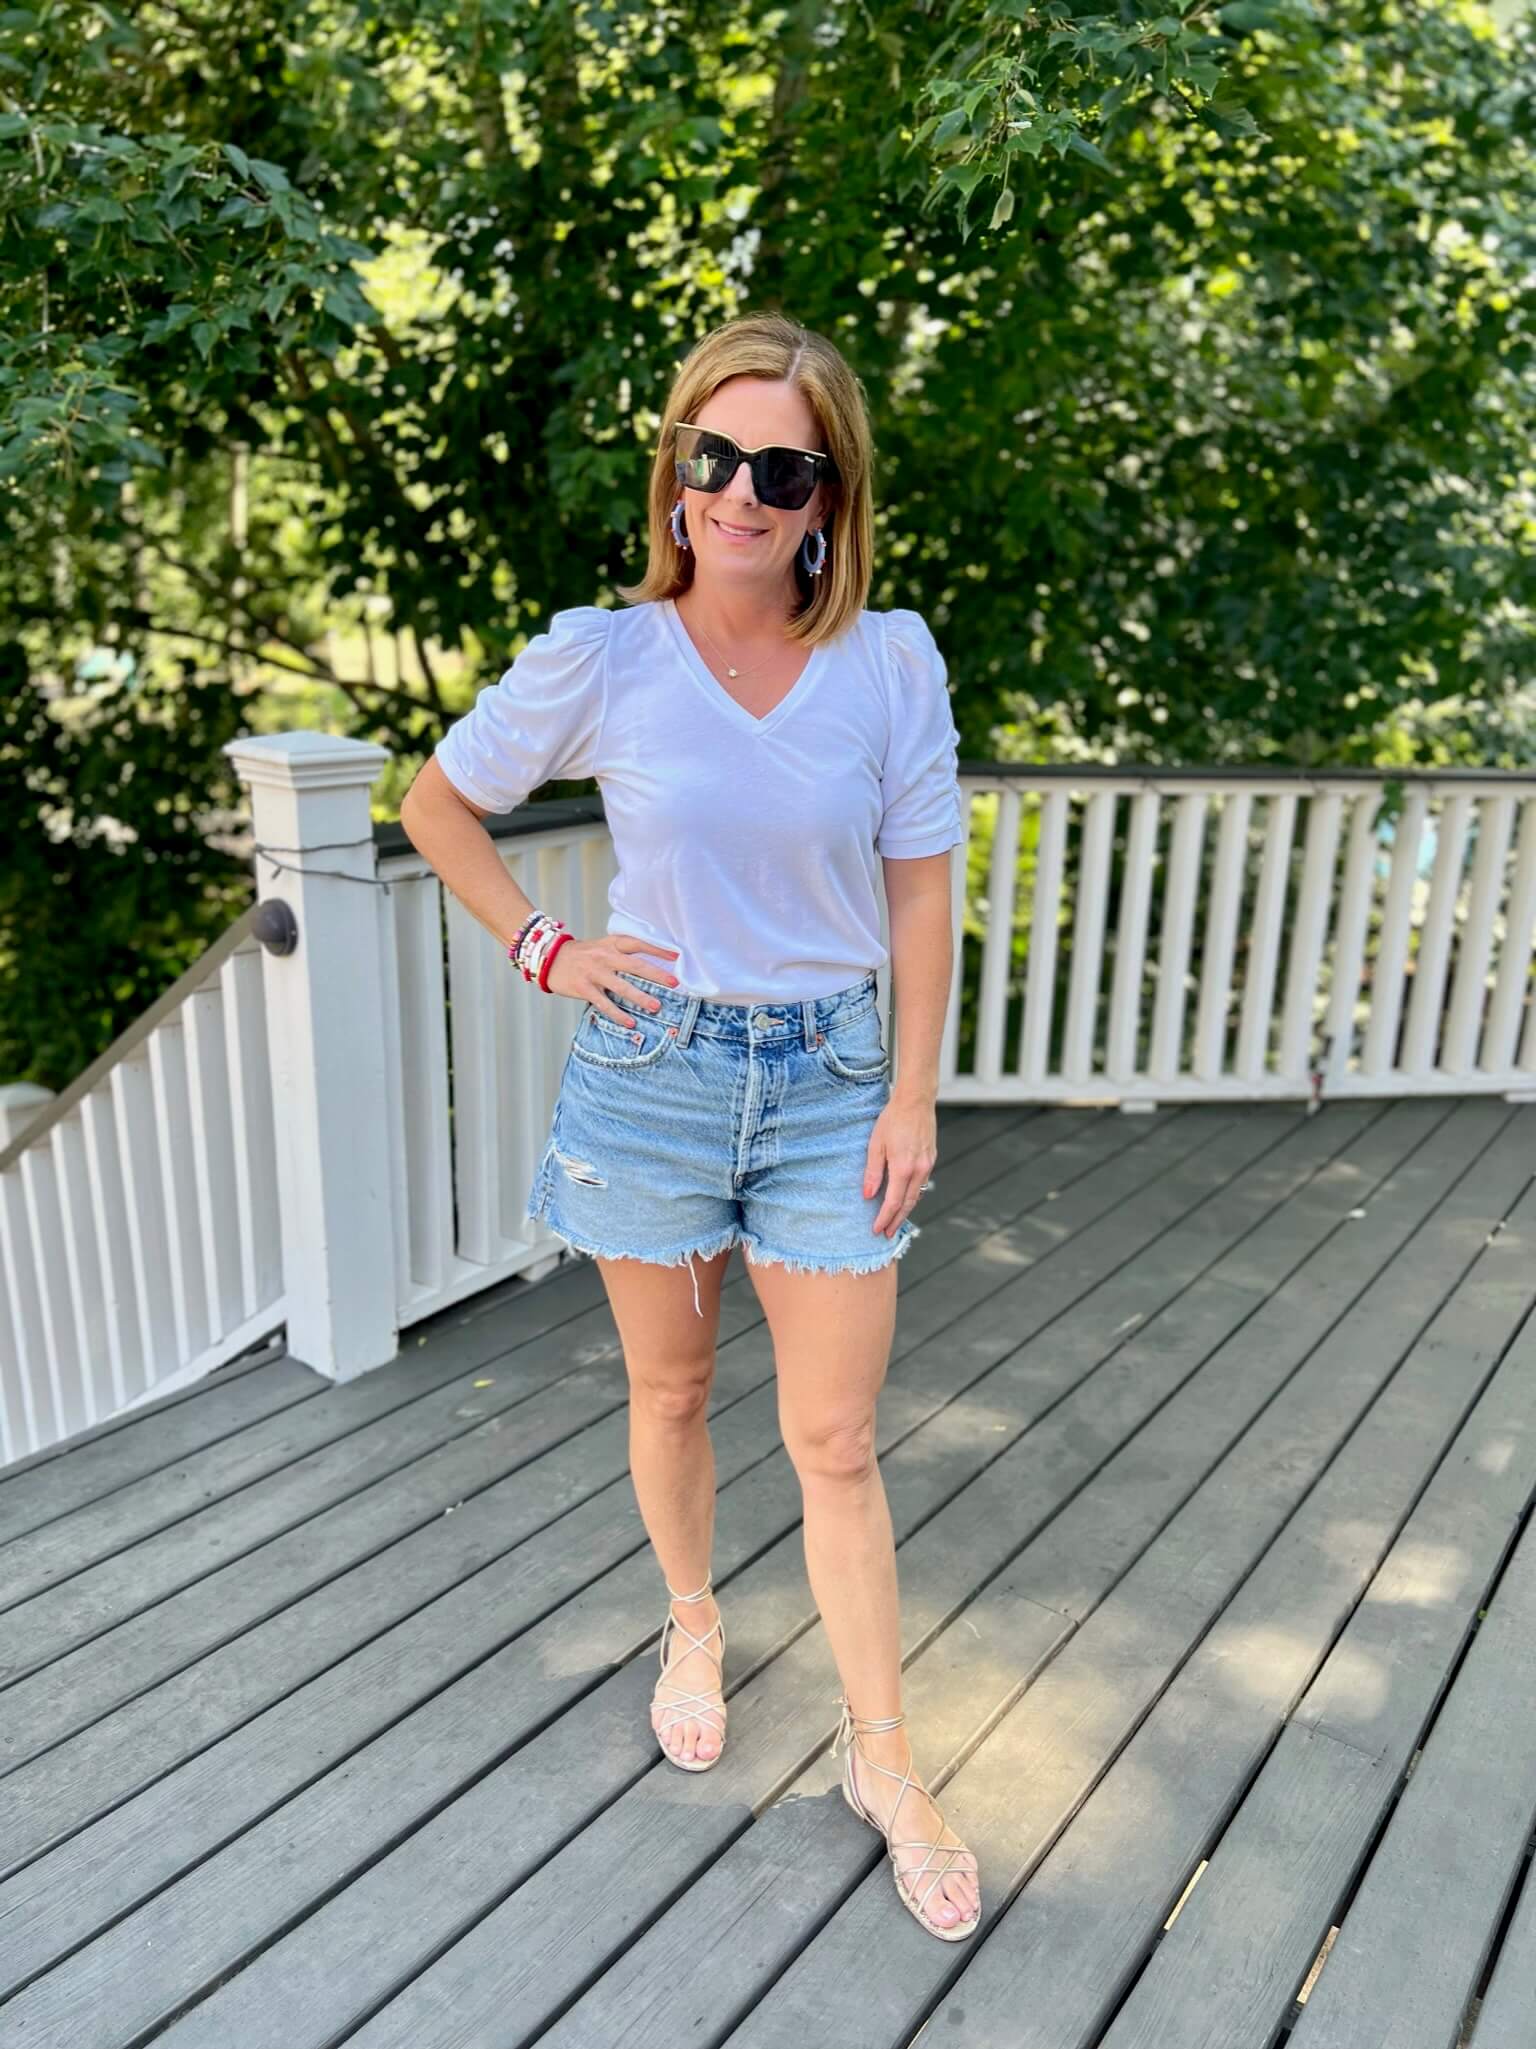 How To Look Festive For July 4th White Tee Shirt & Jean Shorts how to wear jean shorts in your 40s how to style jean shorts for summer how to add color to your look with accessories how to accessorize for the fourth